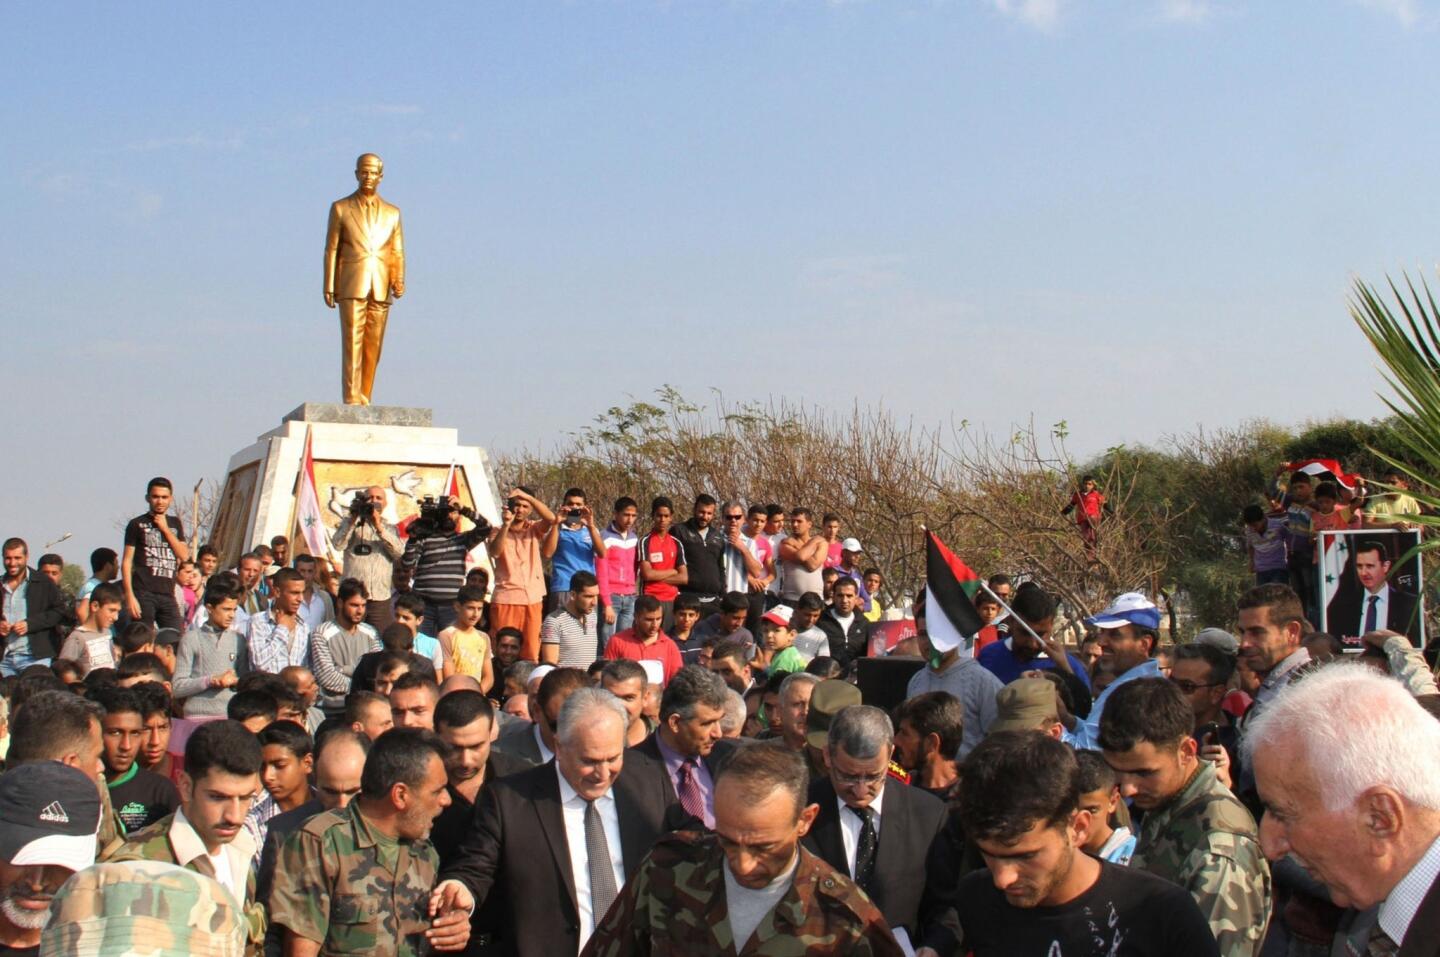 Syria scored 17 points and tied with two other countries. The country is embroiled in a bitter civil war that started in 2011. Above, crowds attend the unveiling of a statue of former Syrian President Hafez al-Assad last month in the coastal city of Tartous.